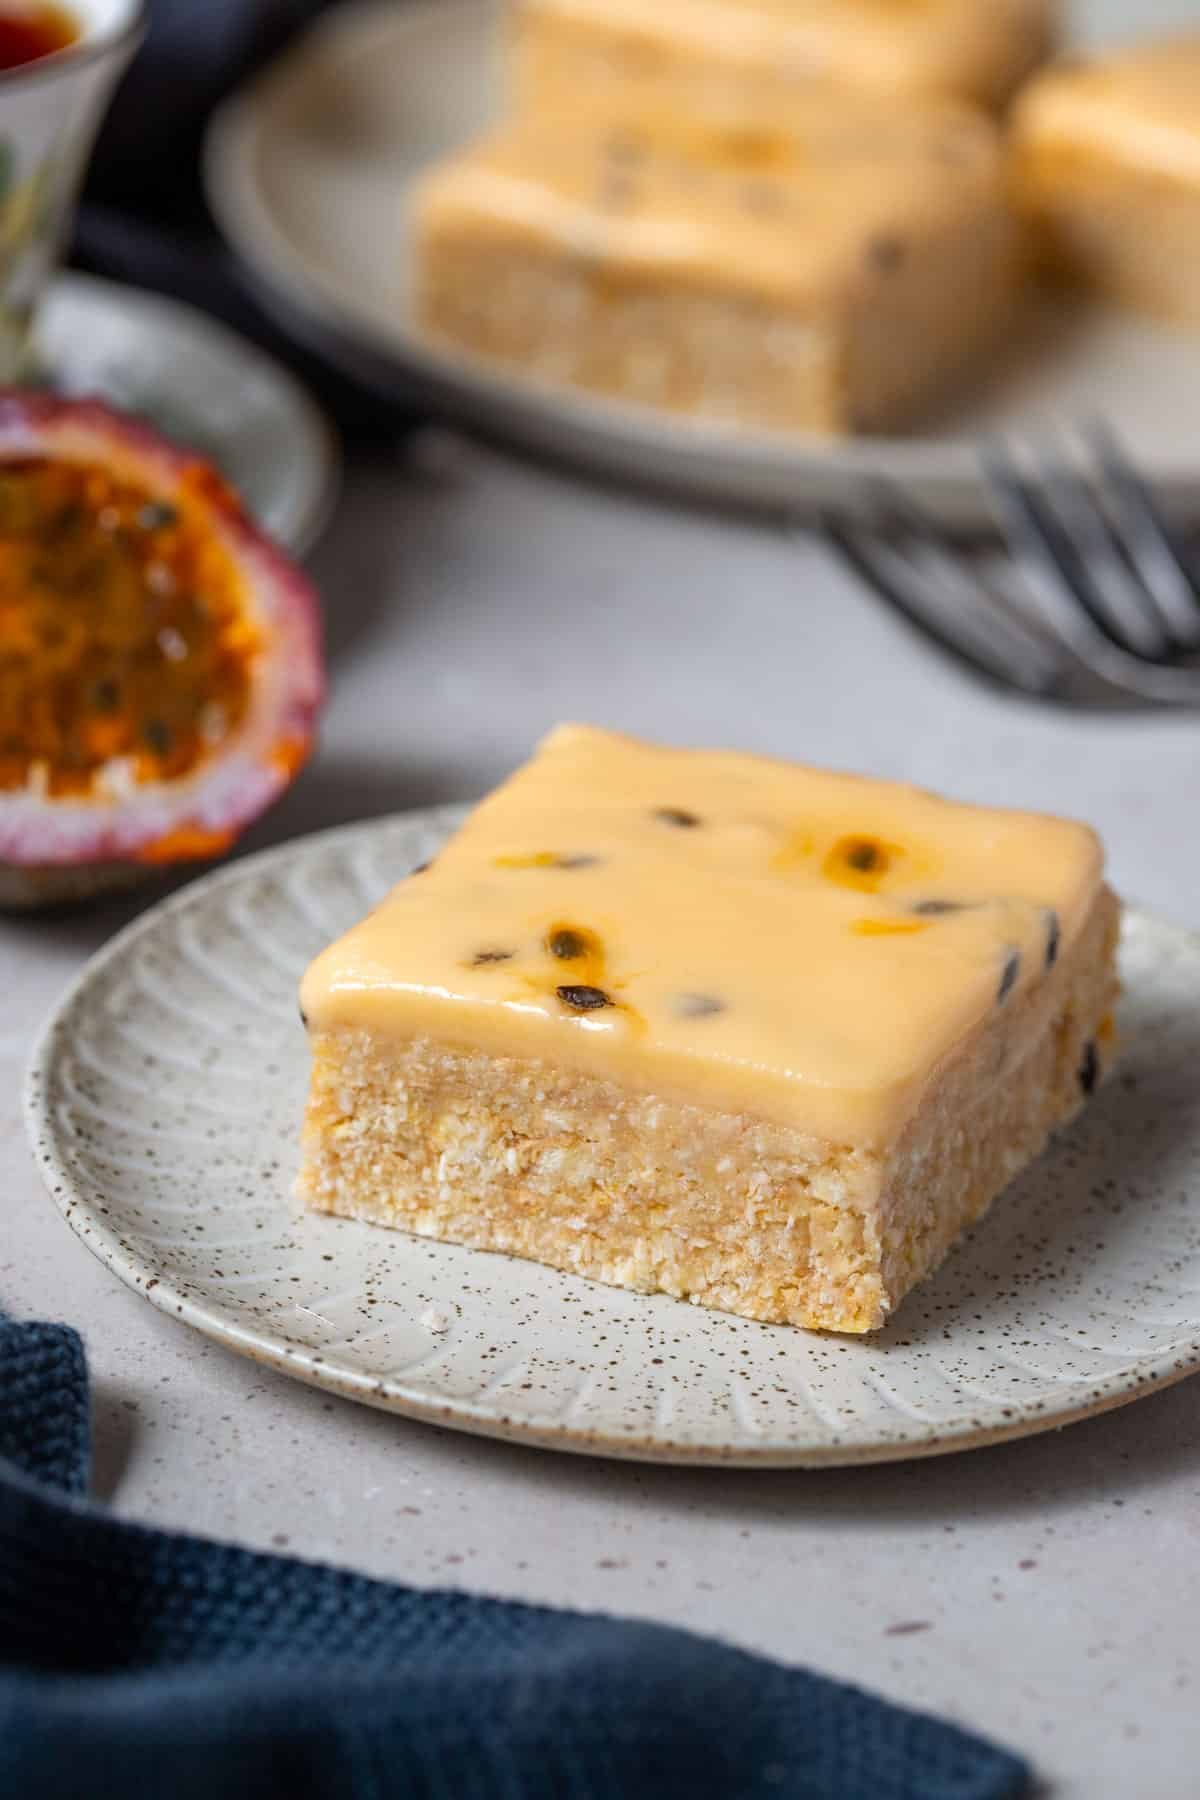 a piece of passion fruit slice on a plate.